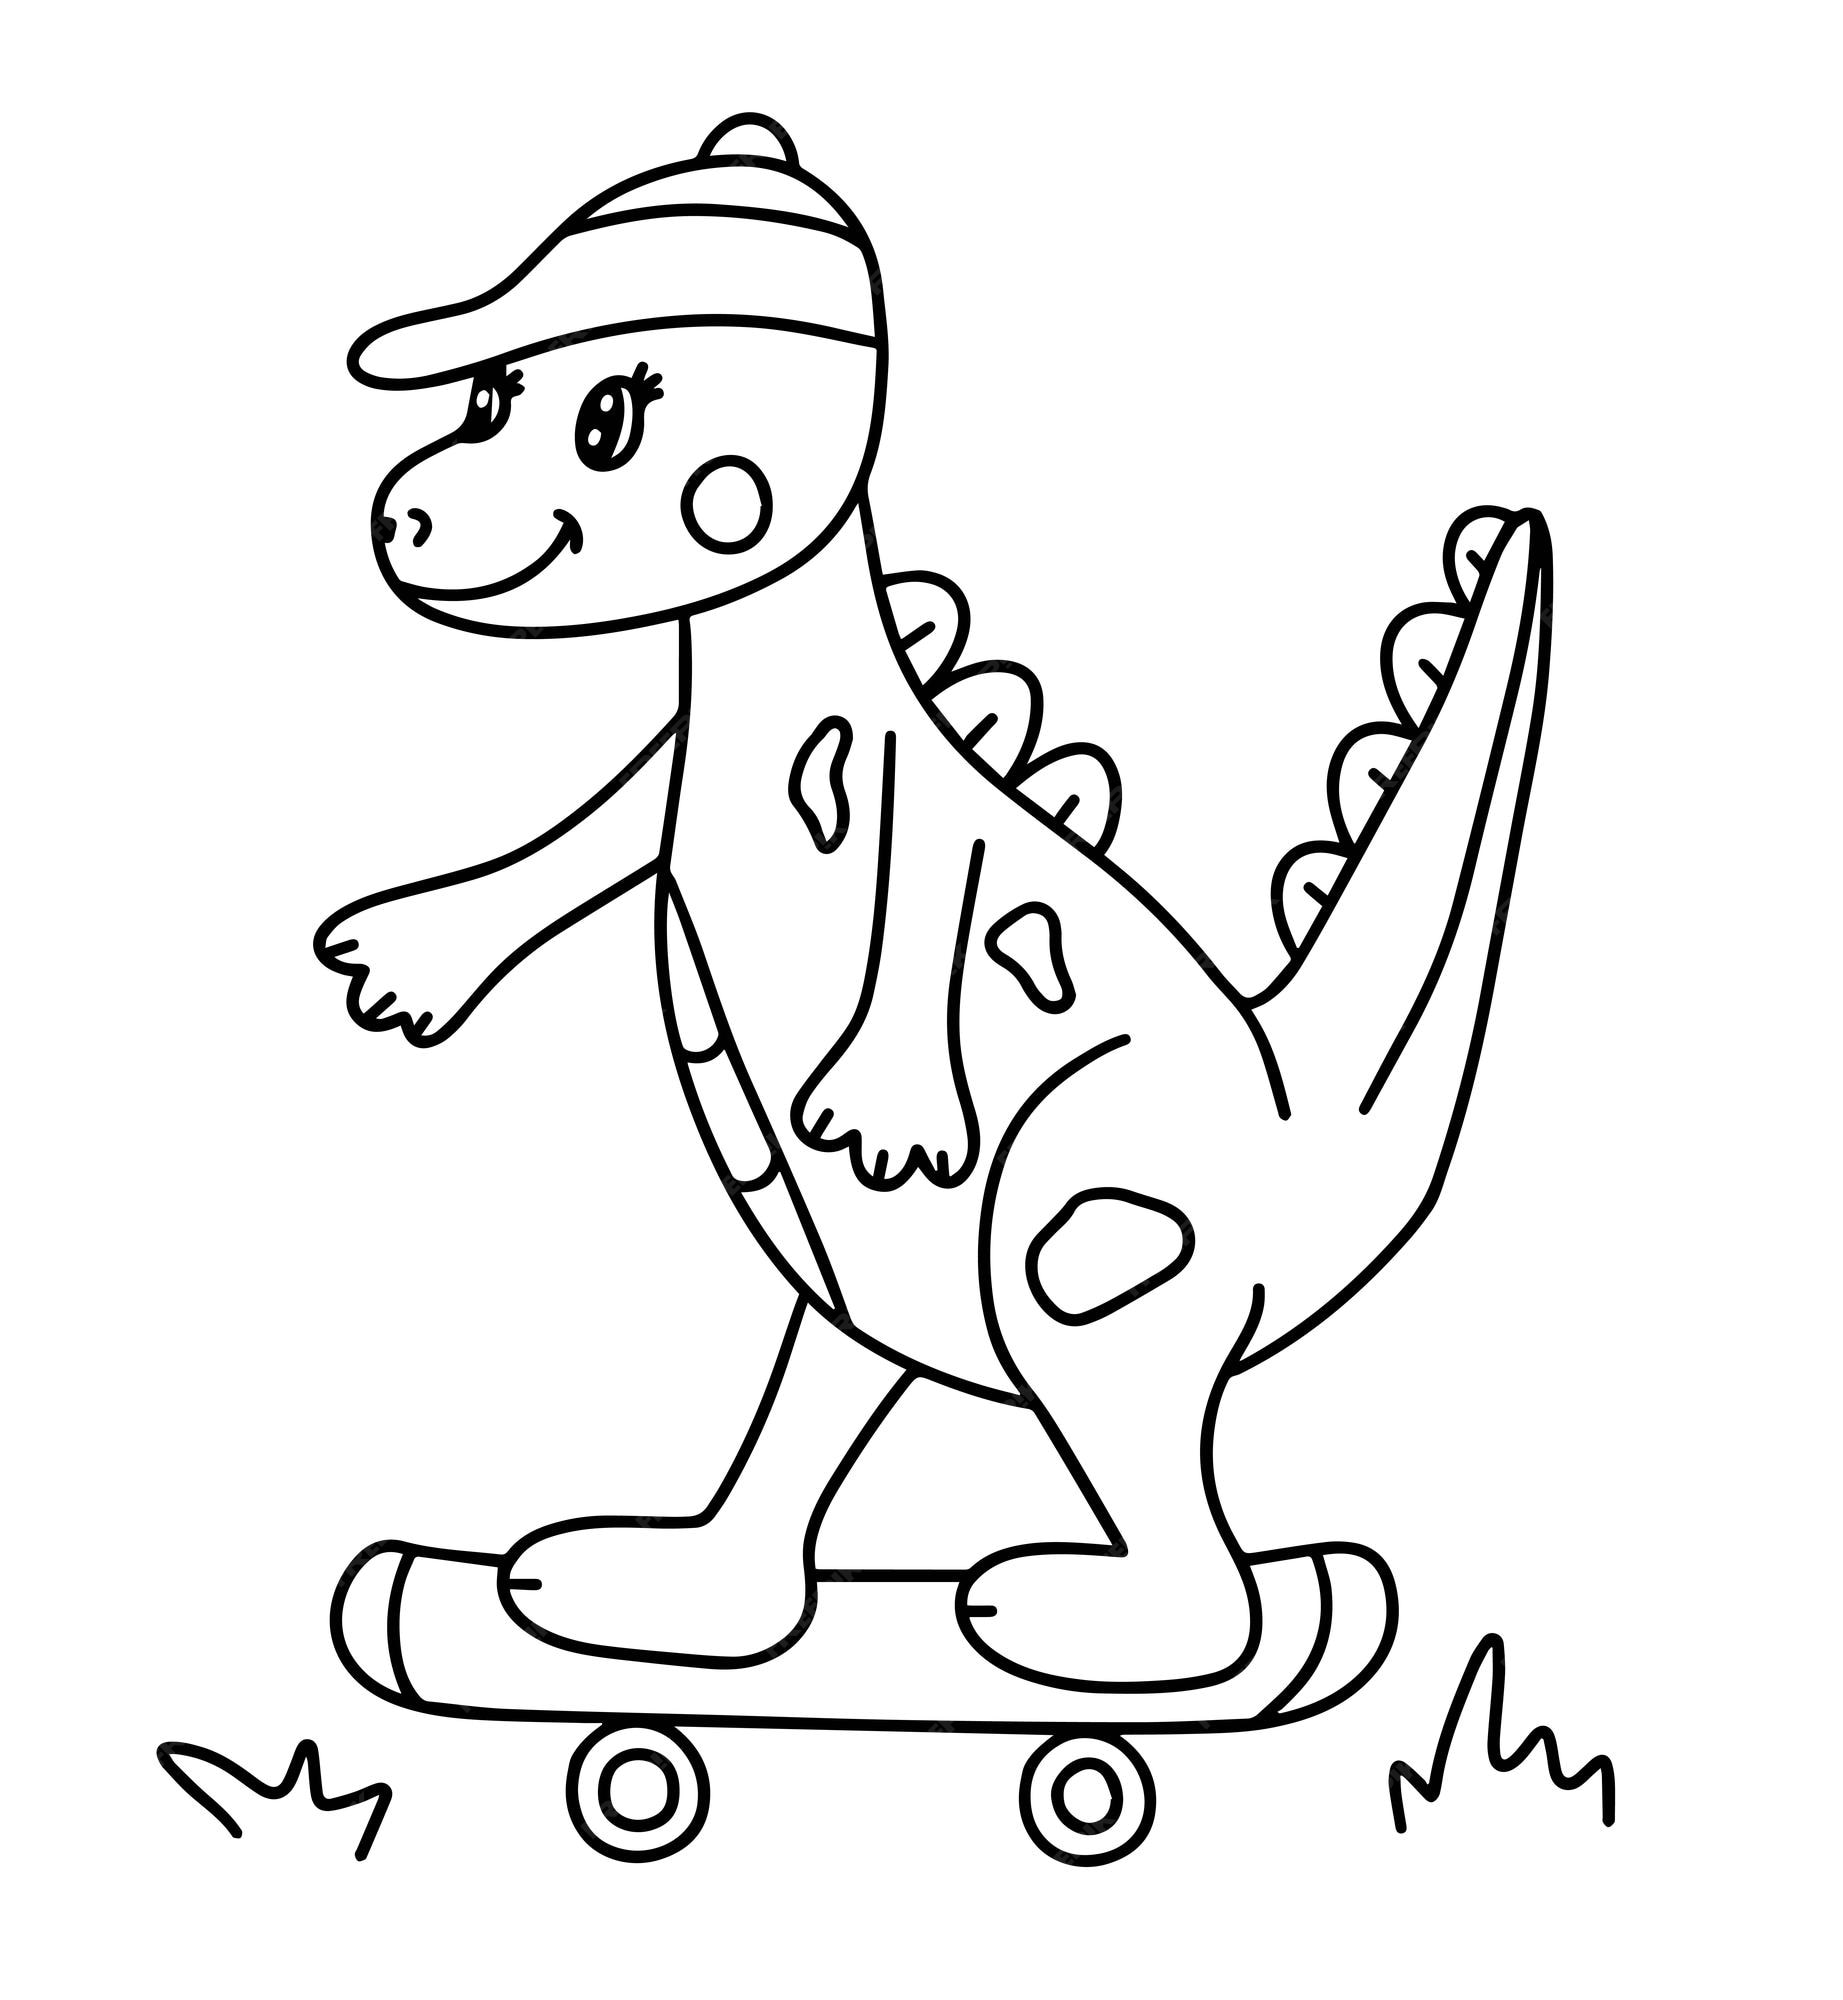 Premium vector coloring book page with dinosaur on skateboard